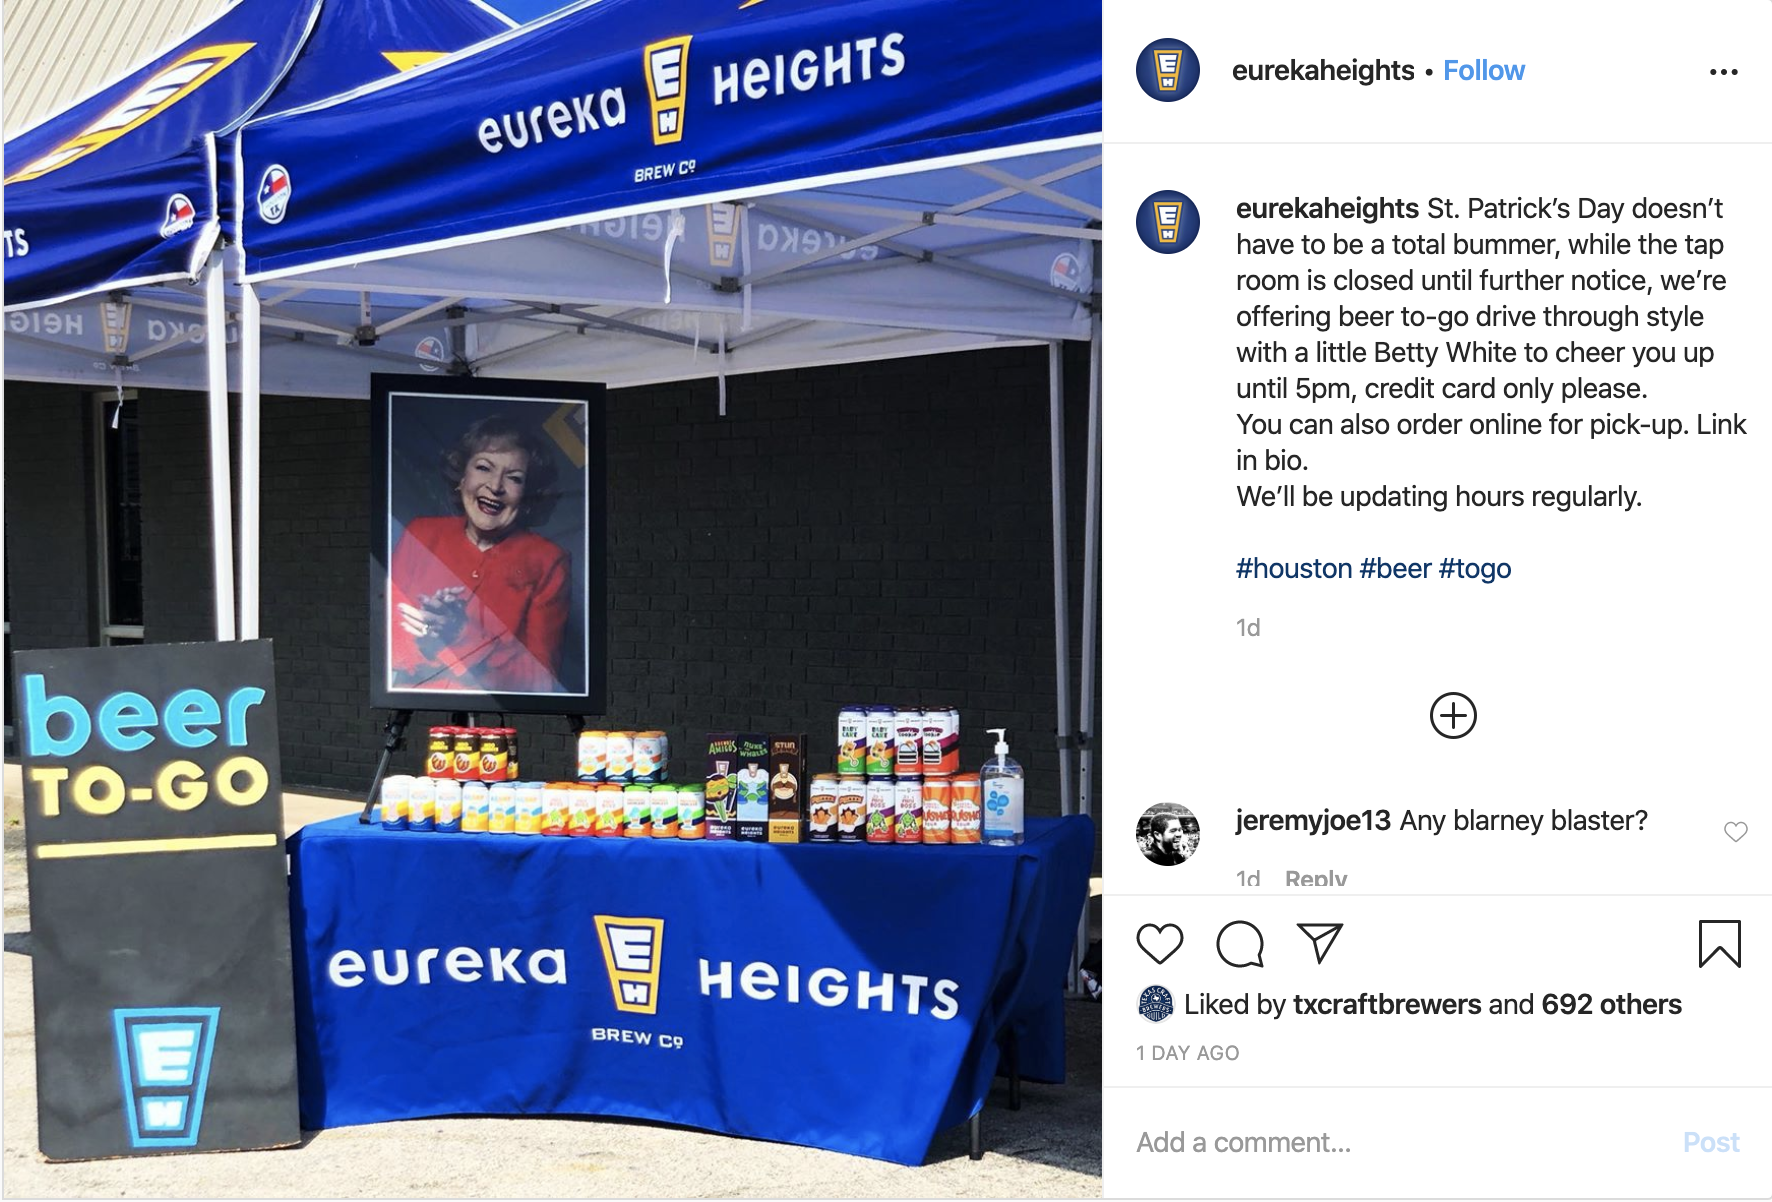 How To Be Resilient: Eureka Heights instagram